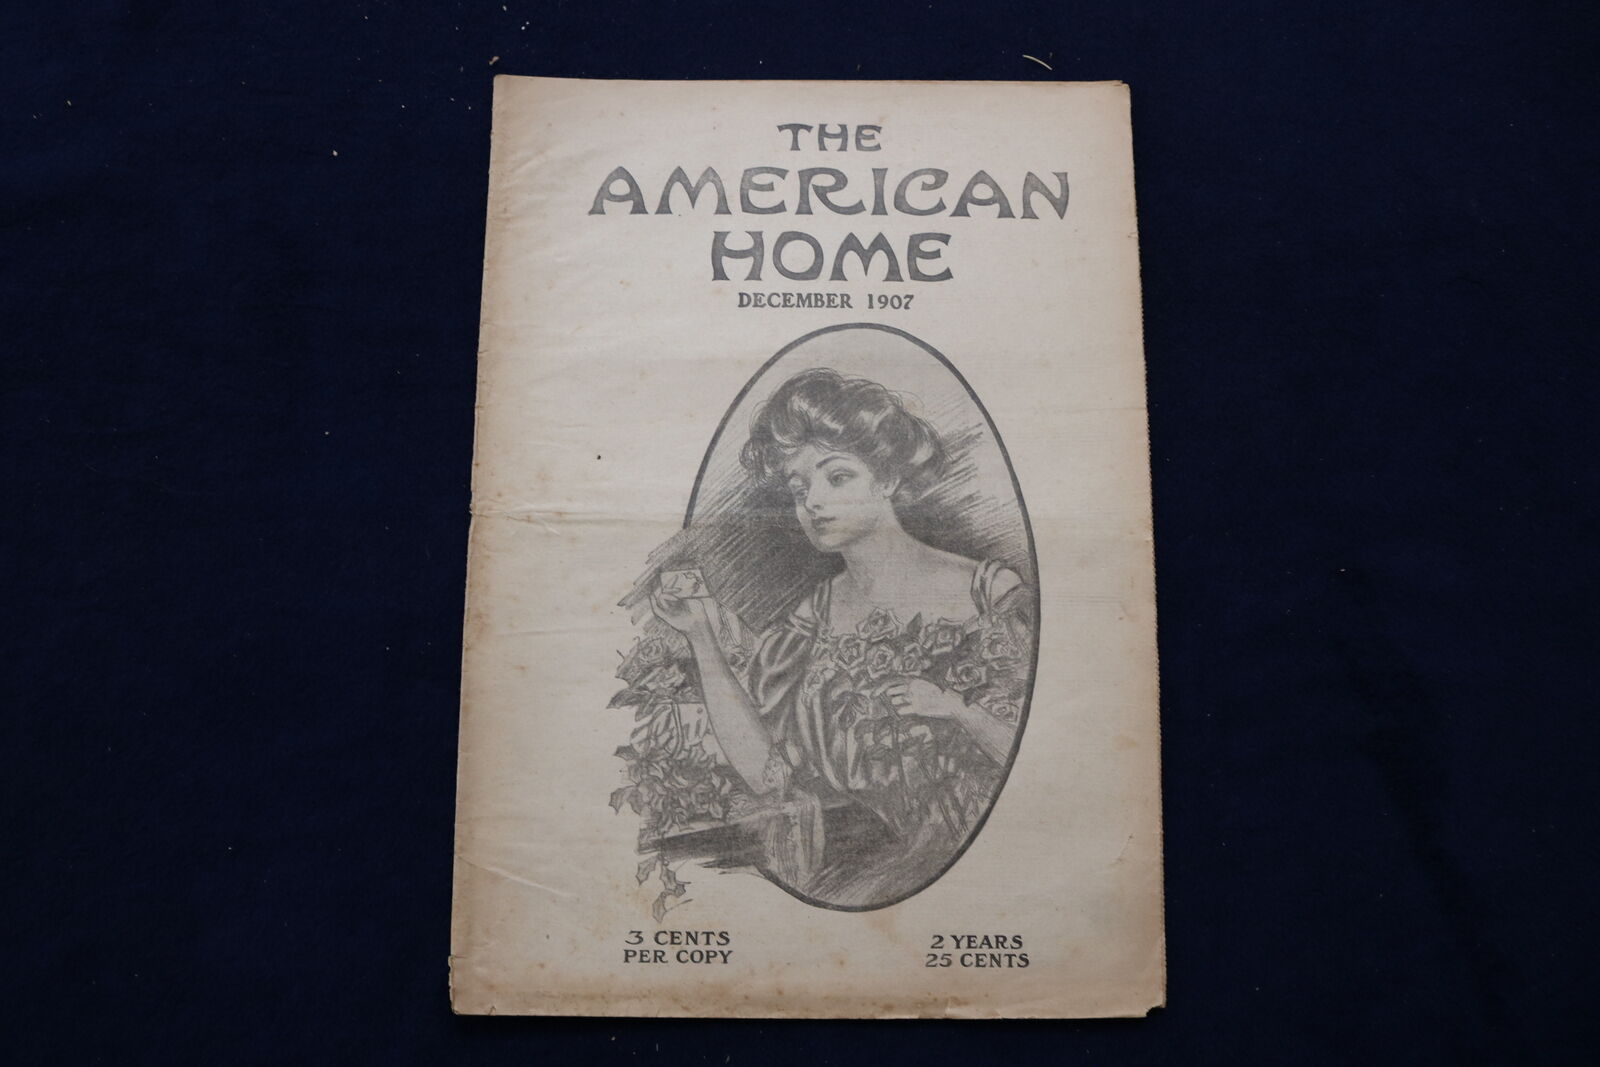 1907 DECEMBER THE AMERICAN HOME NEWSPAPER - NICE ILLUSTRATED COVER - NP 8692